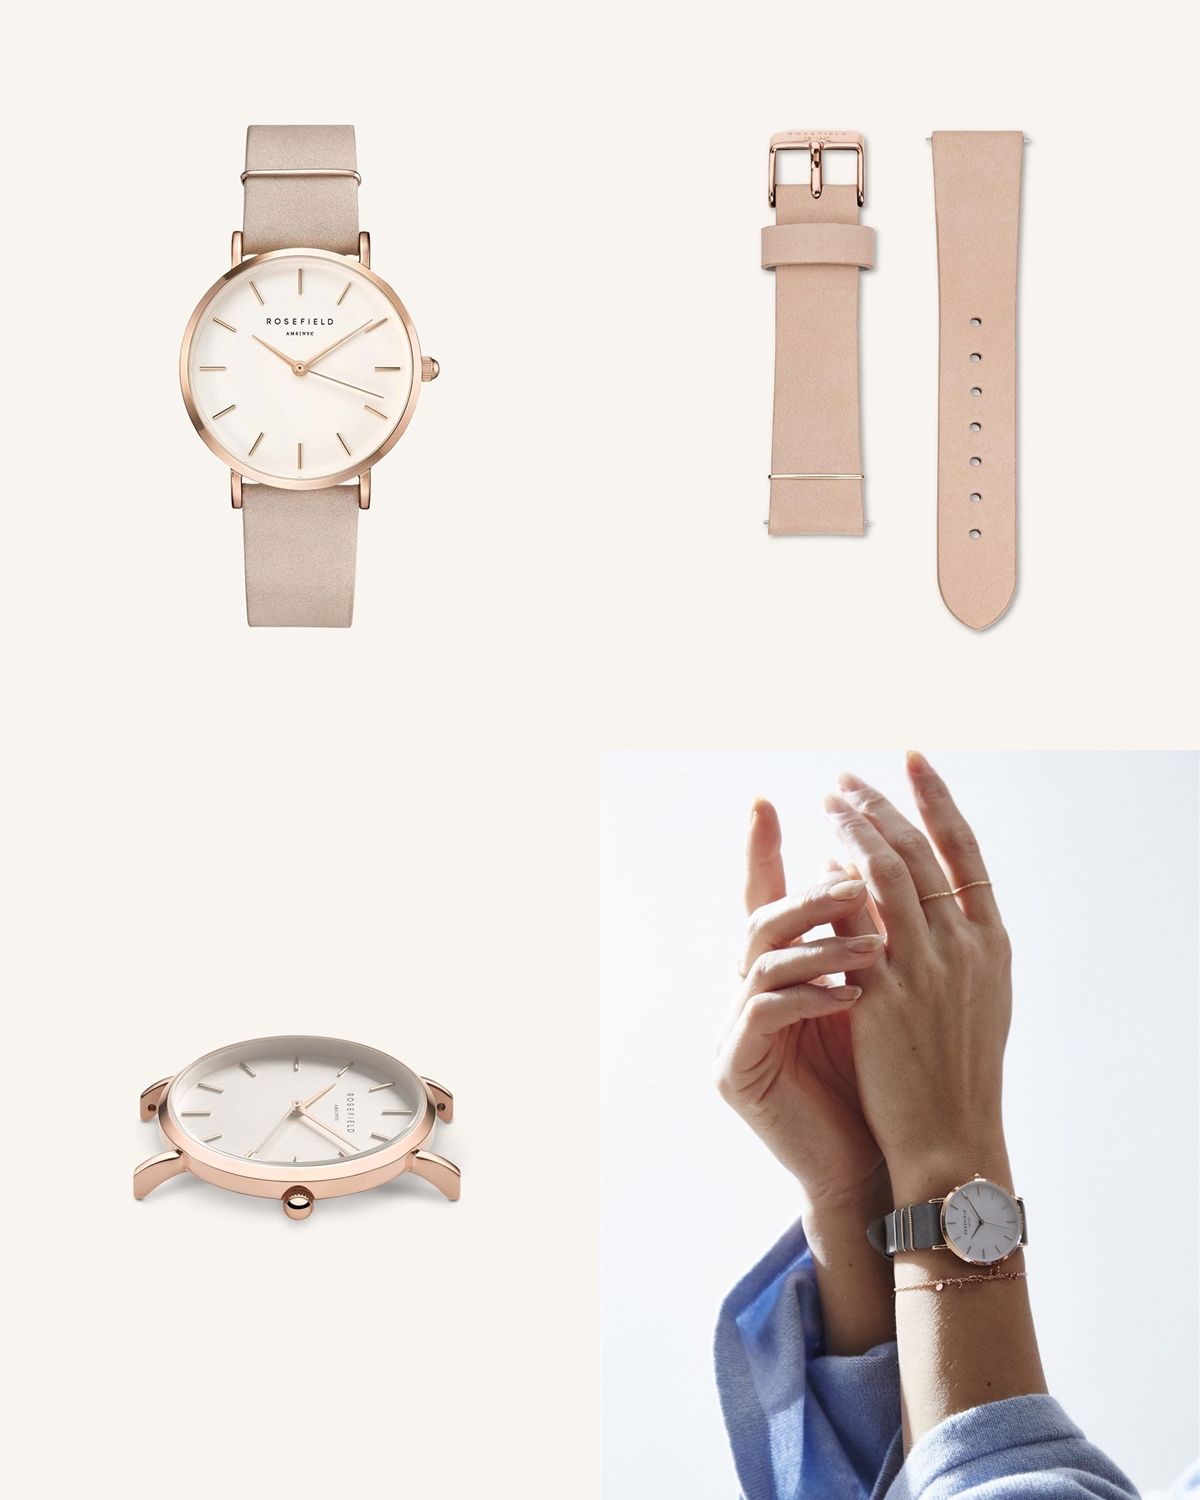 ROSEFIELD ローズフィールド The West Village Soft Pink Rose gold